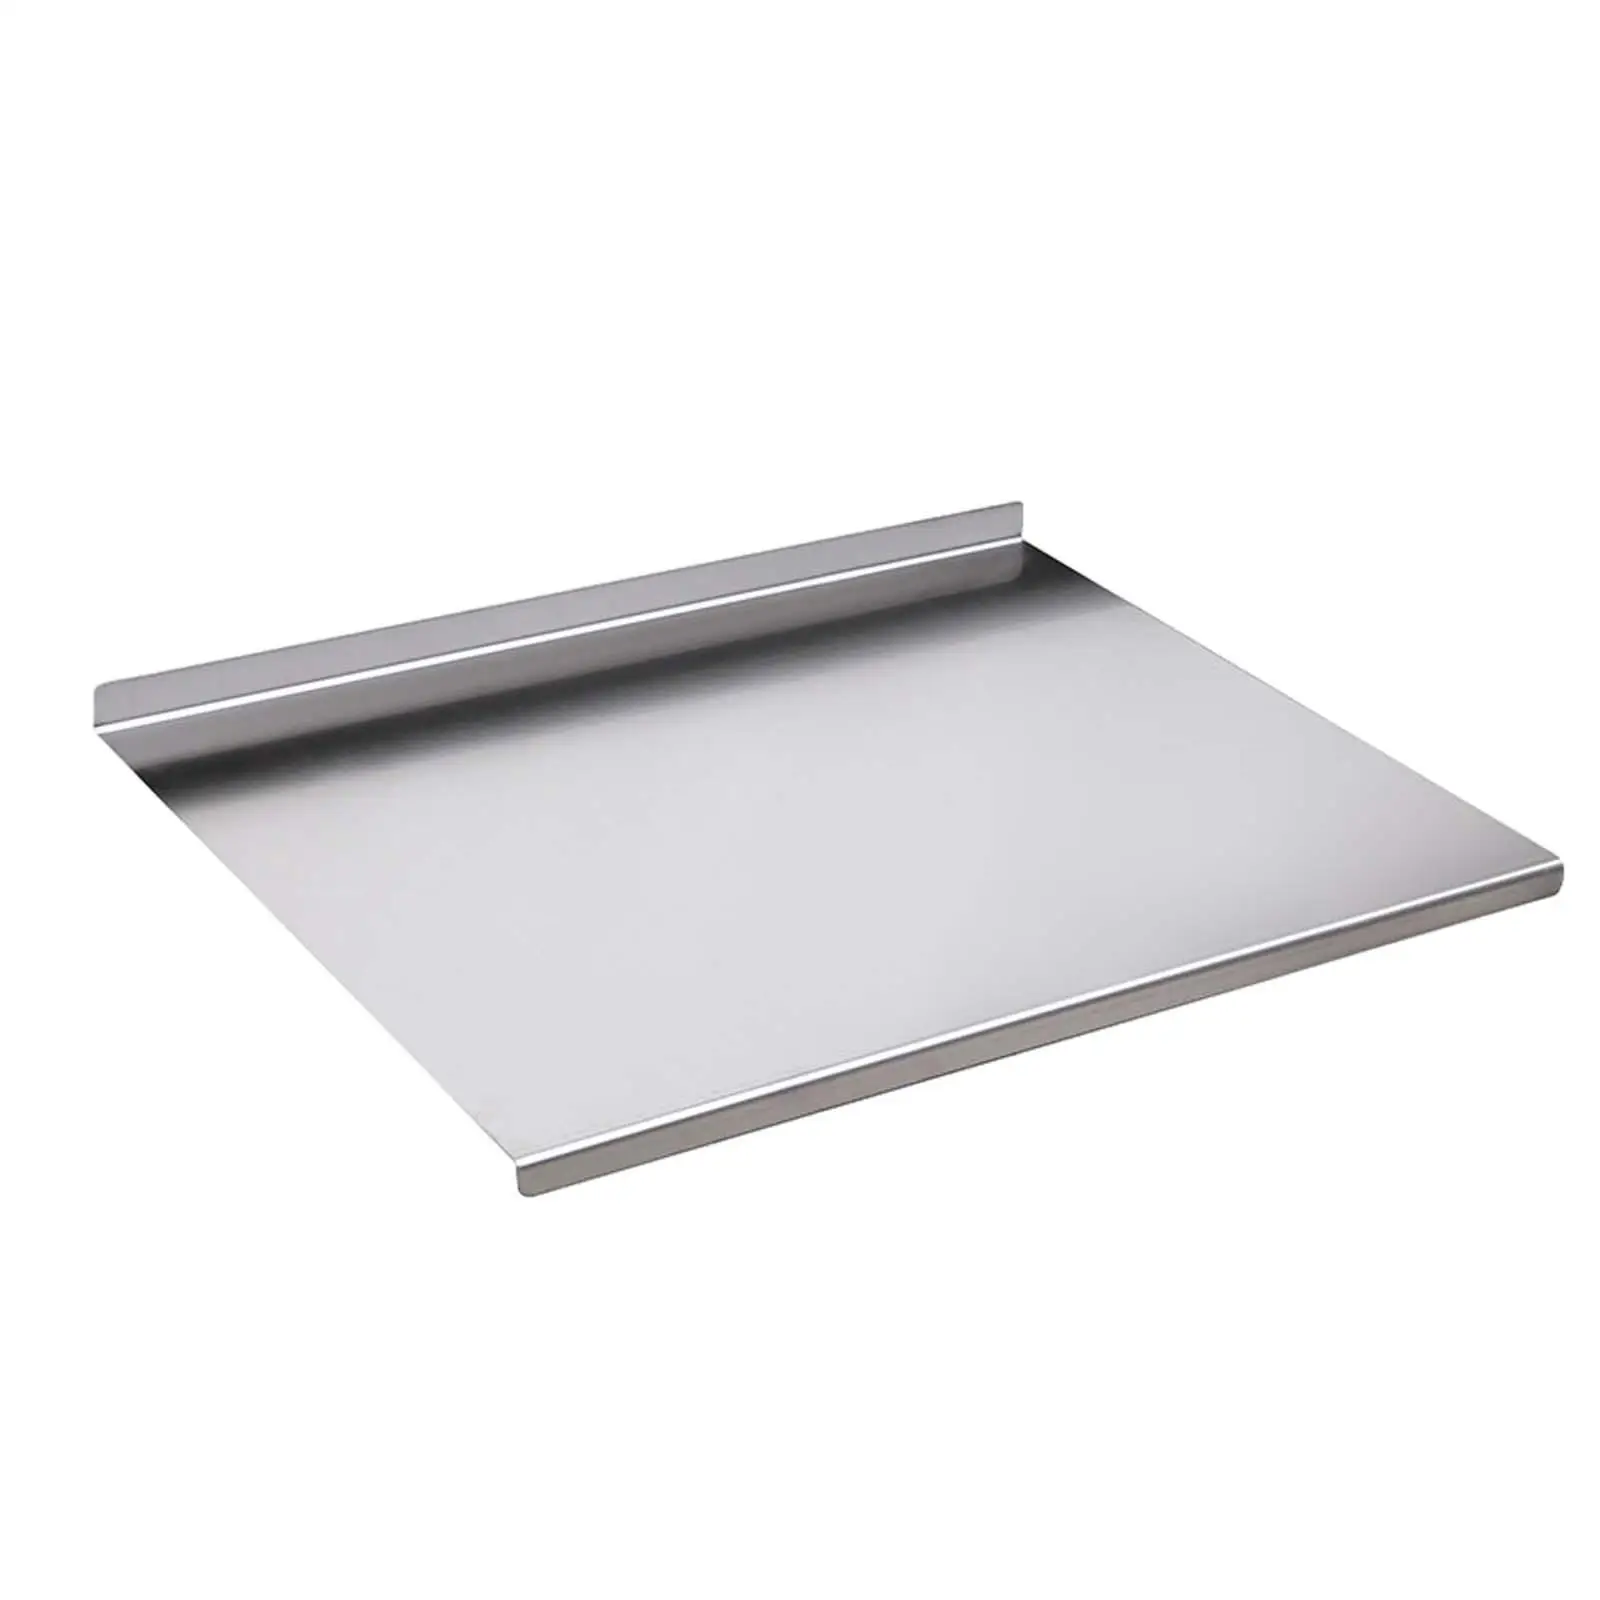 Stainless Steel Chopping Board Pizza Biscuits Board Baking Board Nonstick